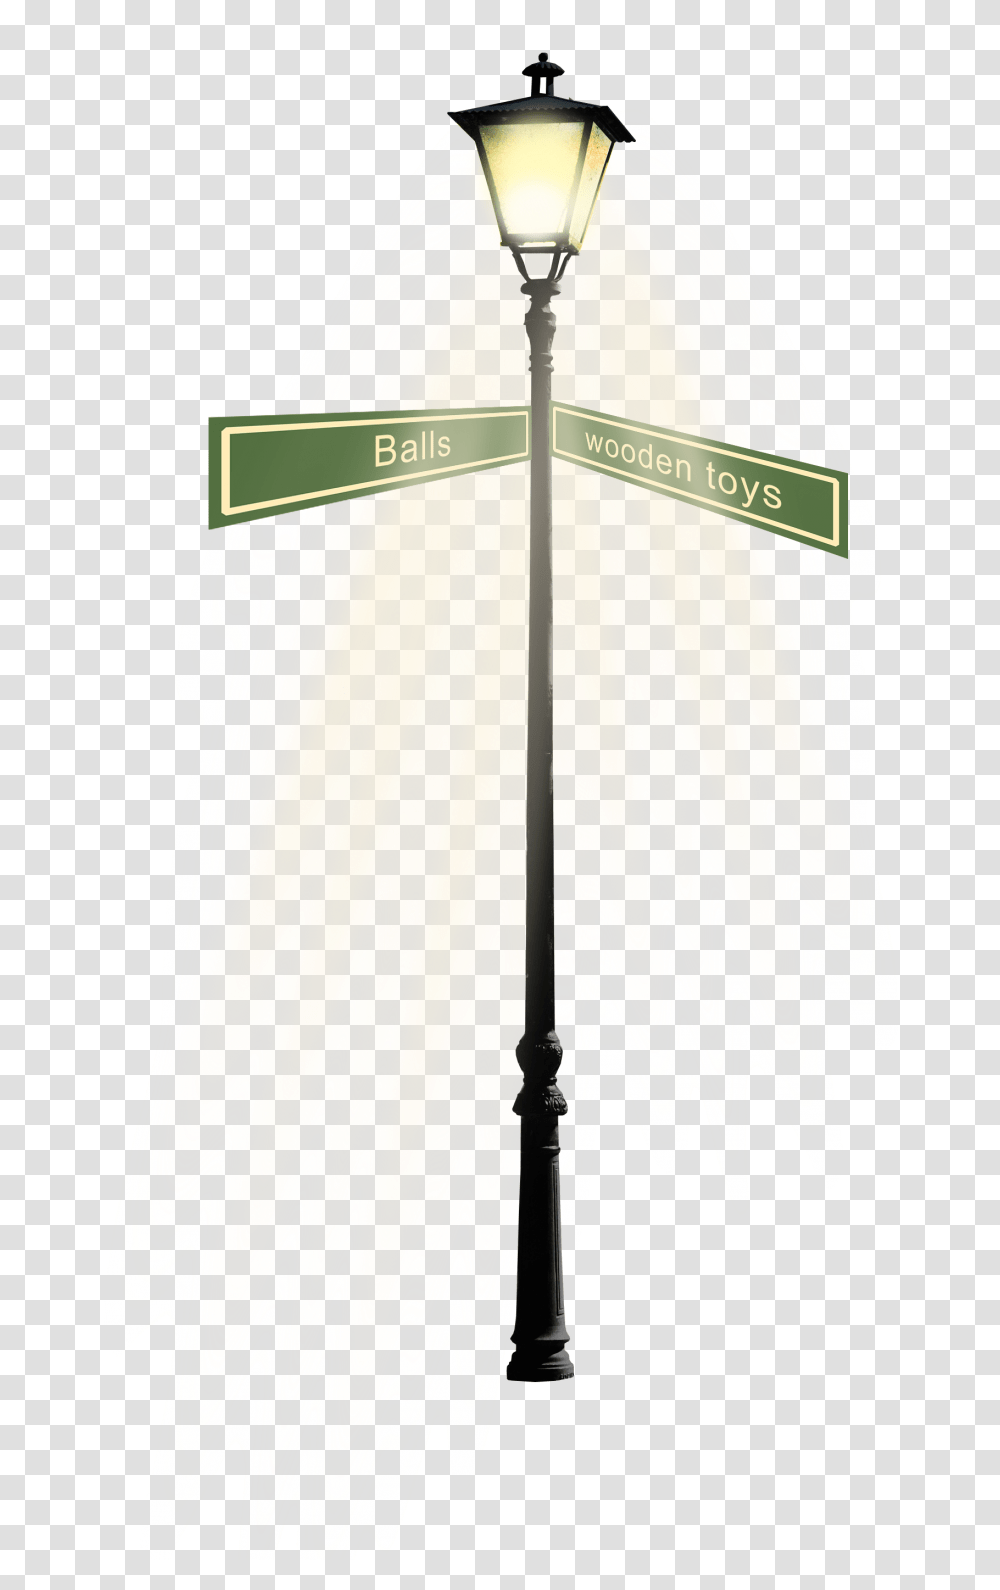 Download Light Street Fixture Lights Free Clipart Hd Street Light, Clothing, Apparel, Lamp, Lampshade Transparent Png